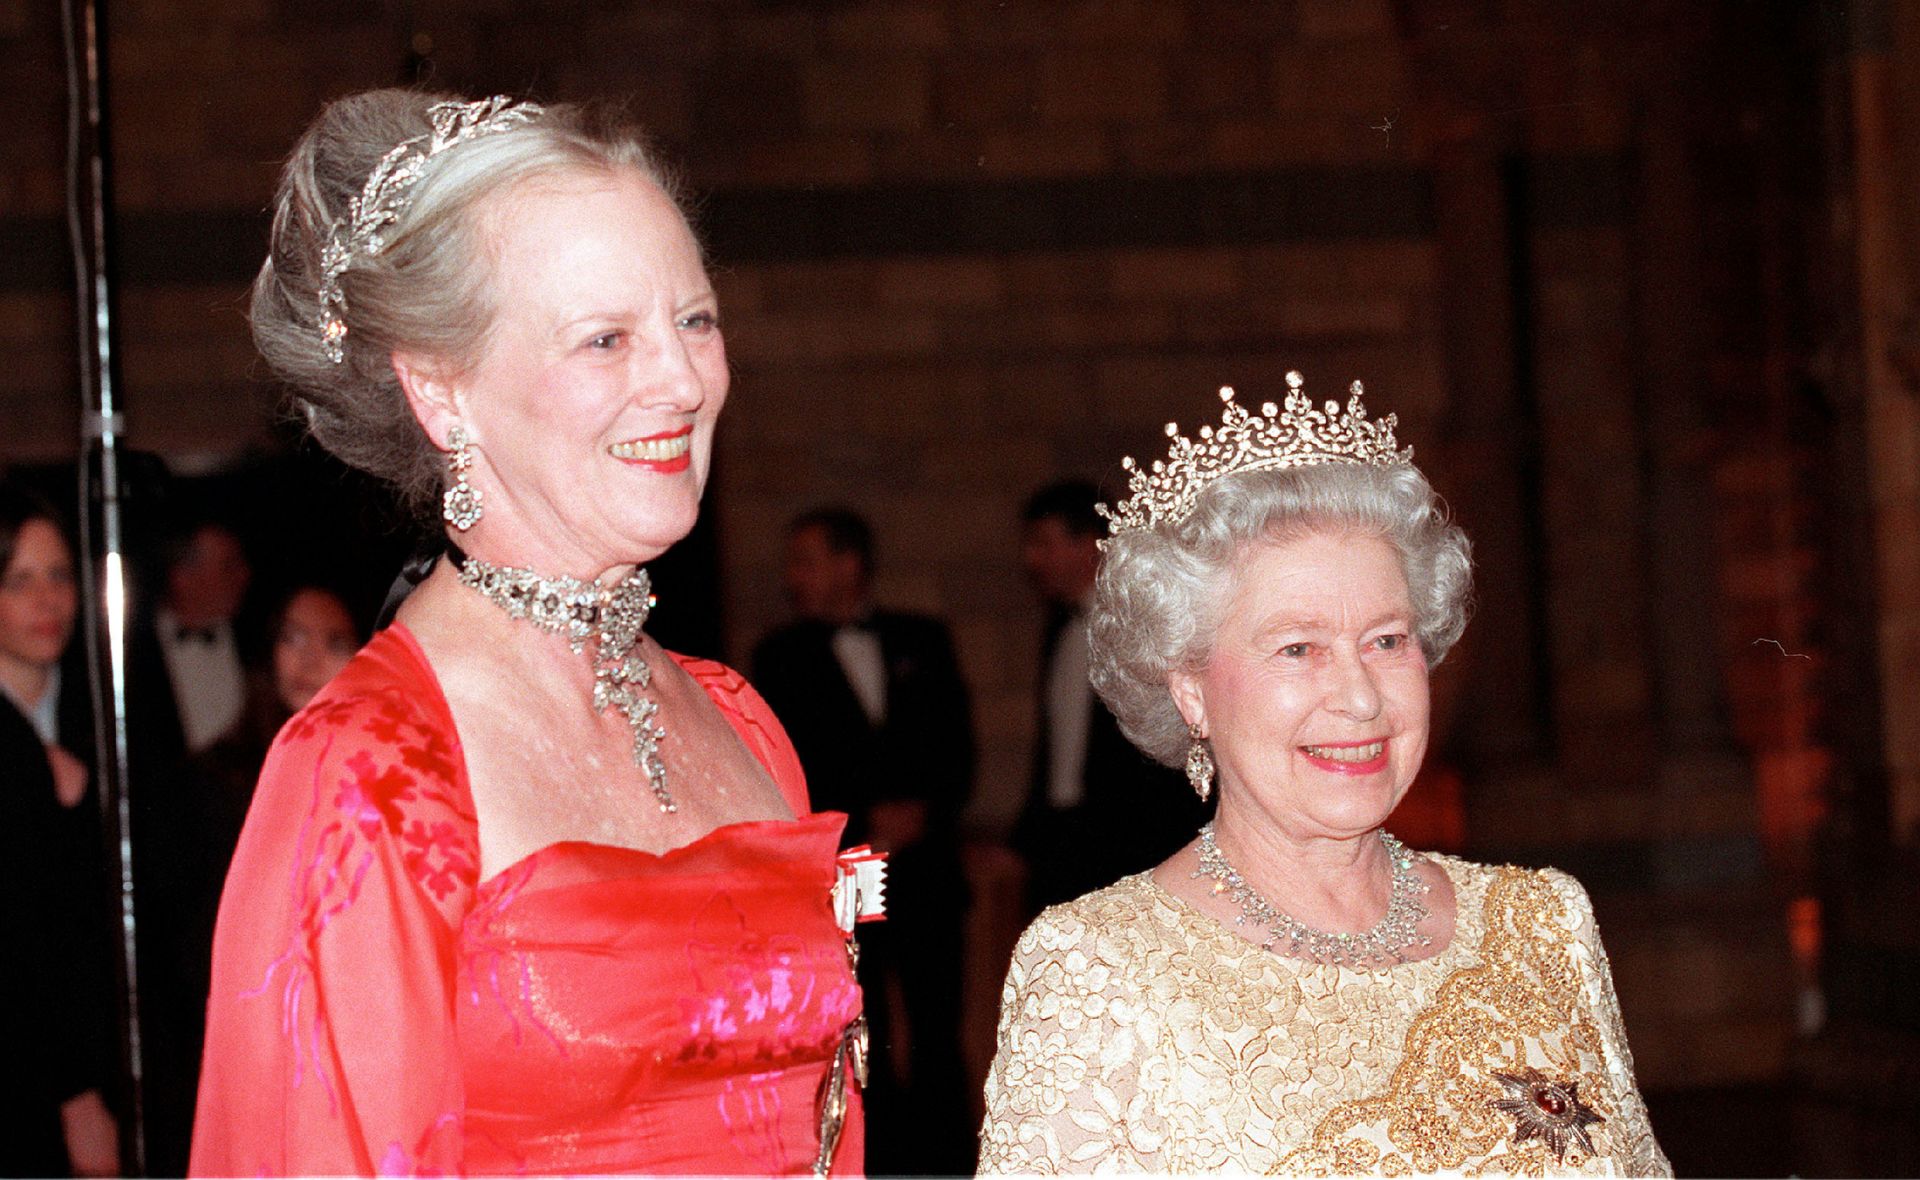 Queen Margrethe II struggled to hold back tears during her dear friend the Queen’s funeral